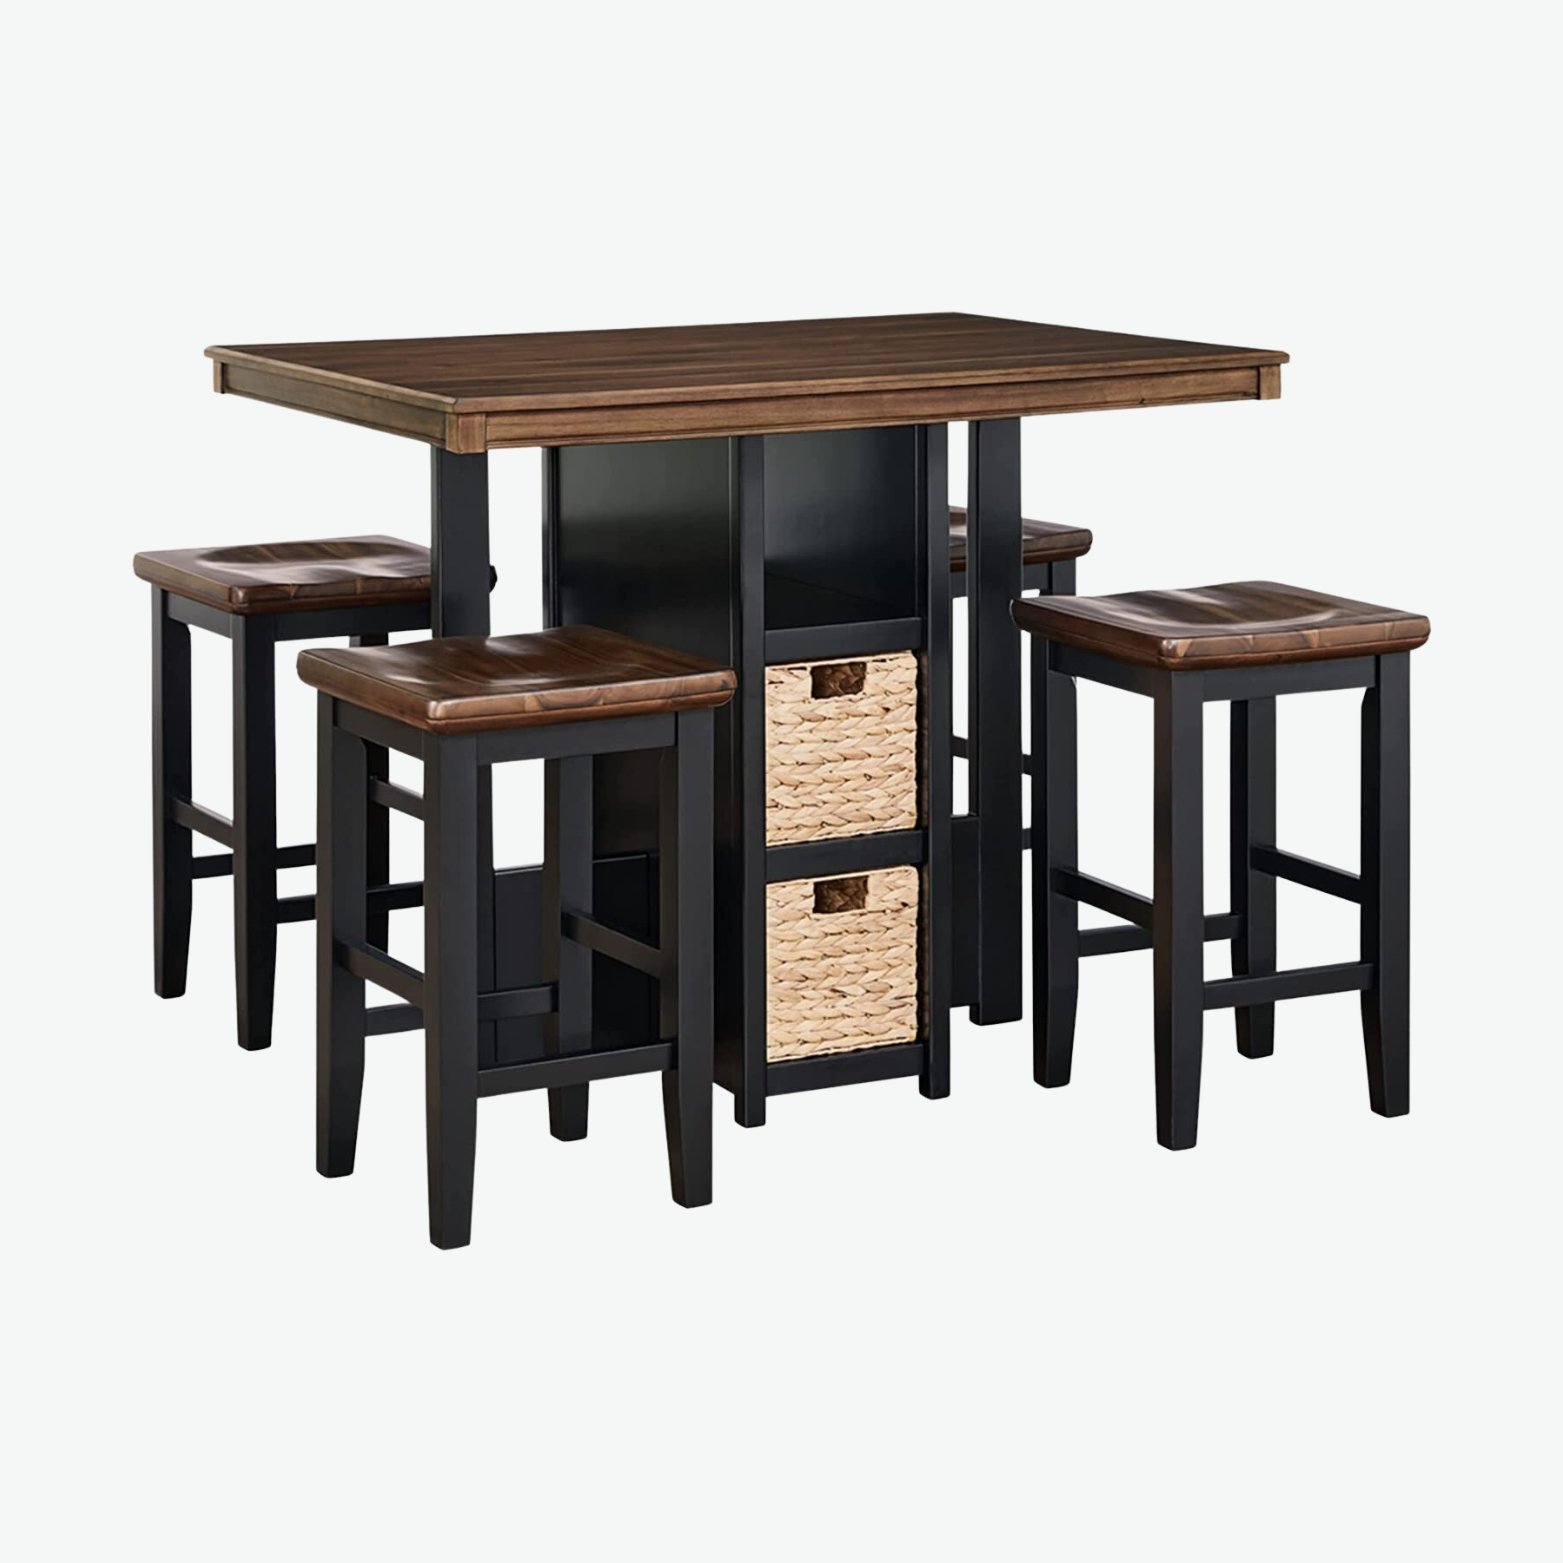 Wood Top, Black Legs Game Table with Shelves and Leather Padded Stools.jpg